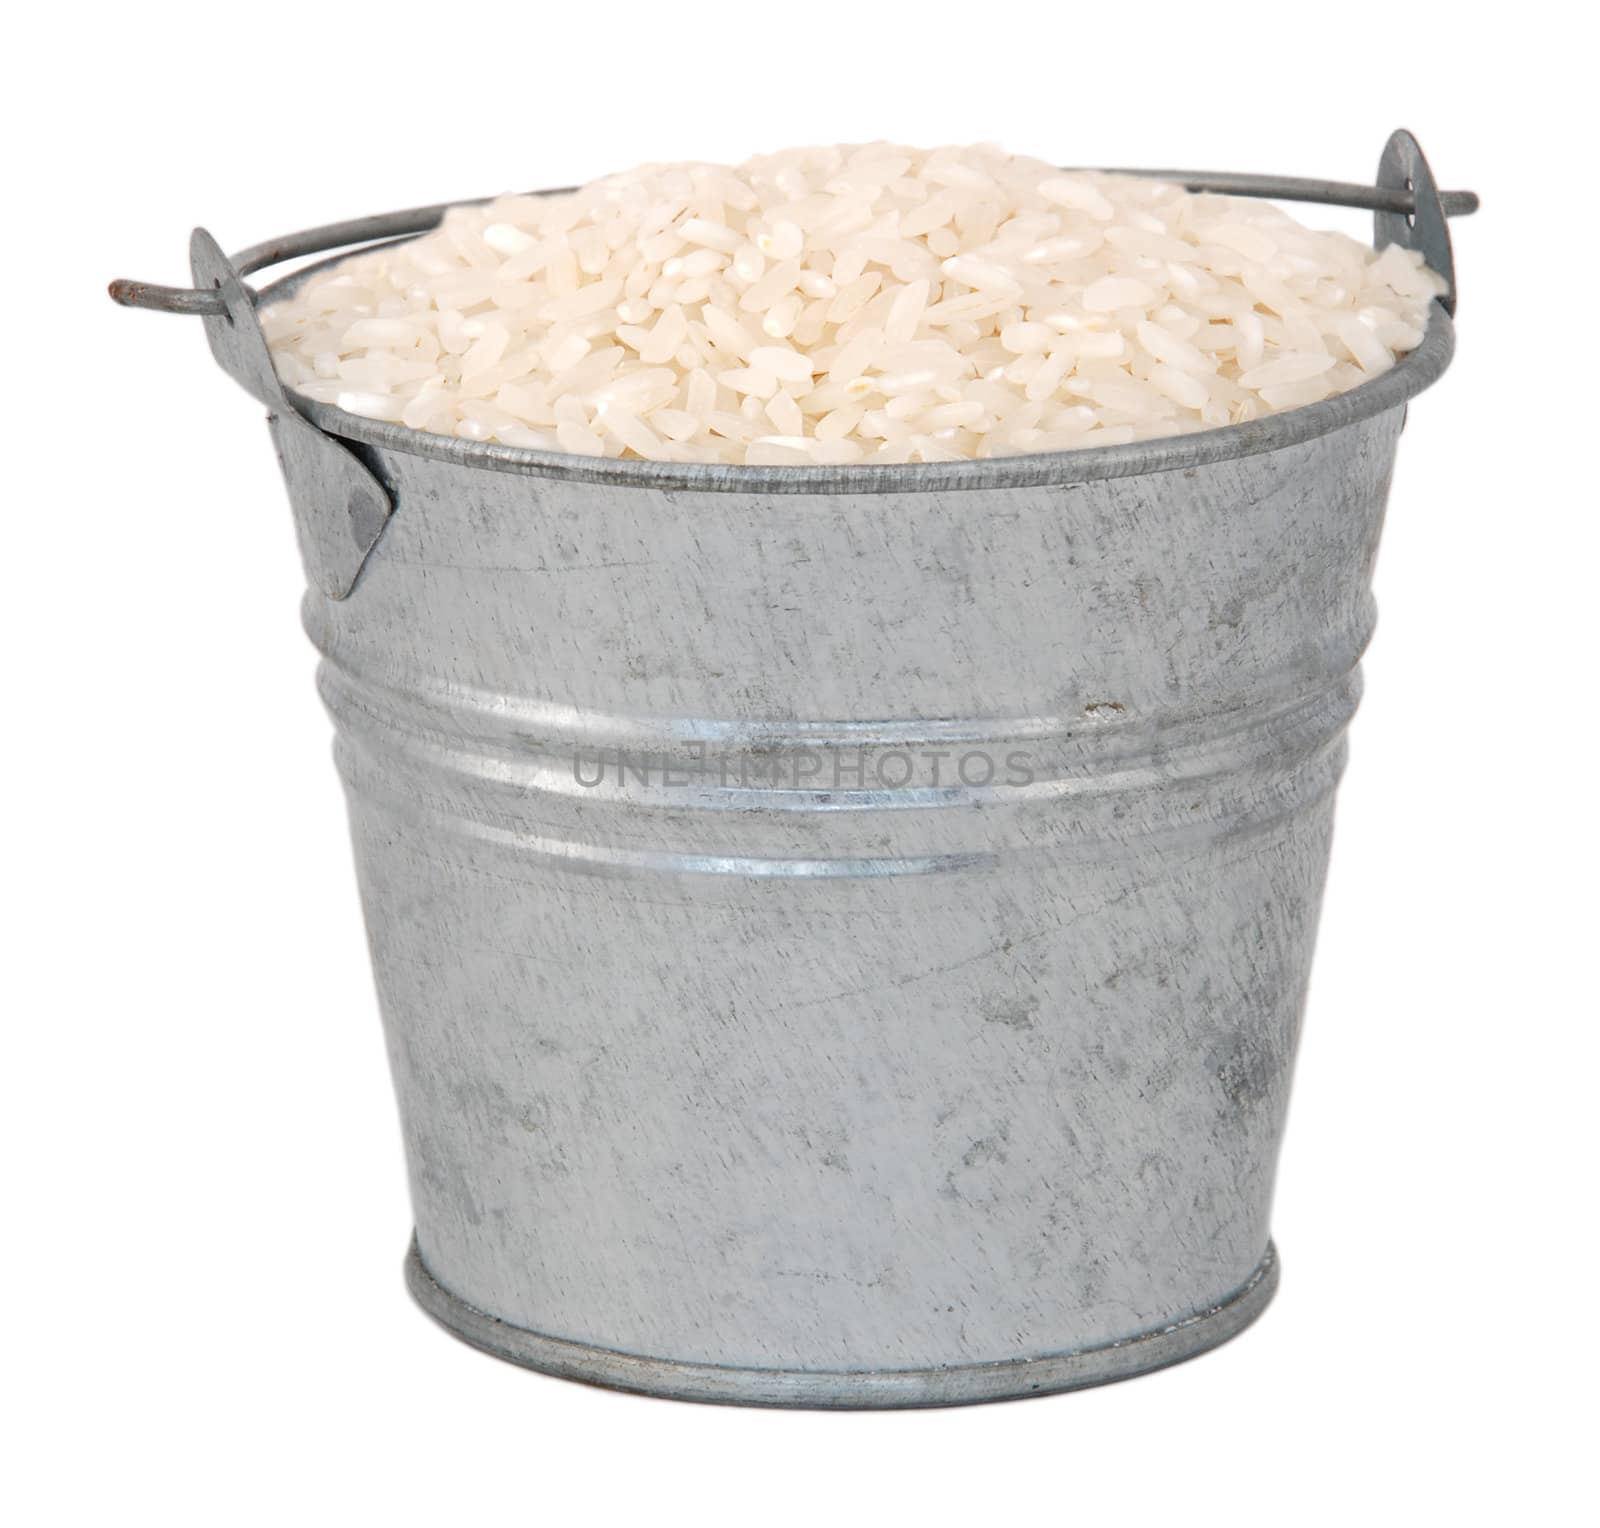 White long grain rice in a miniature metal bucket, isolated on a white background